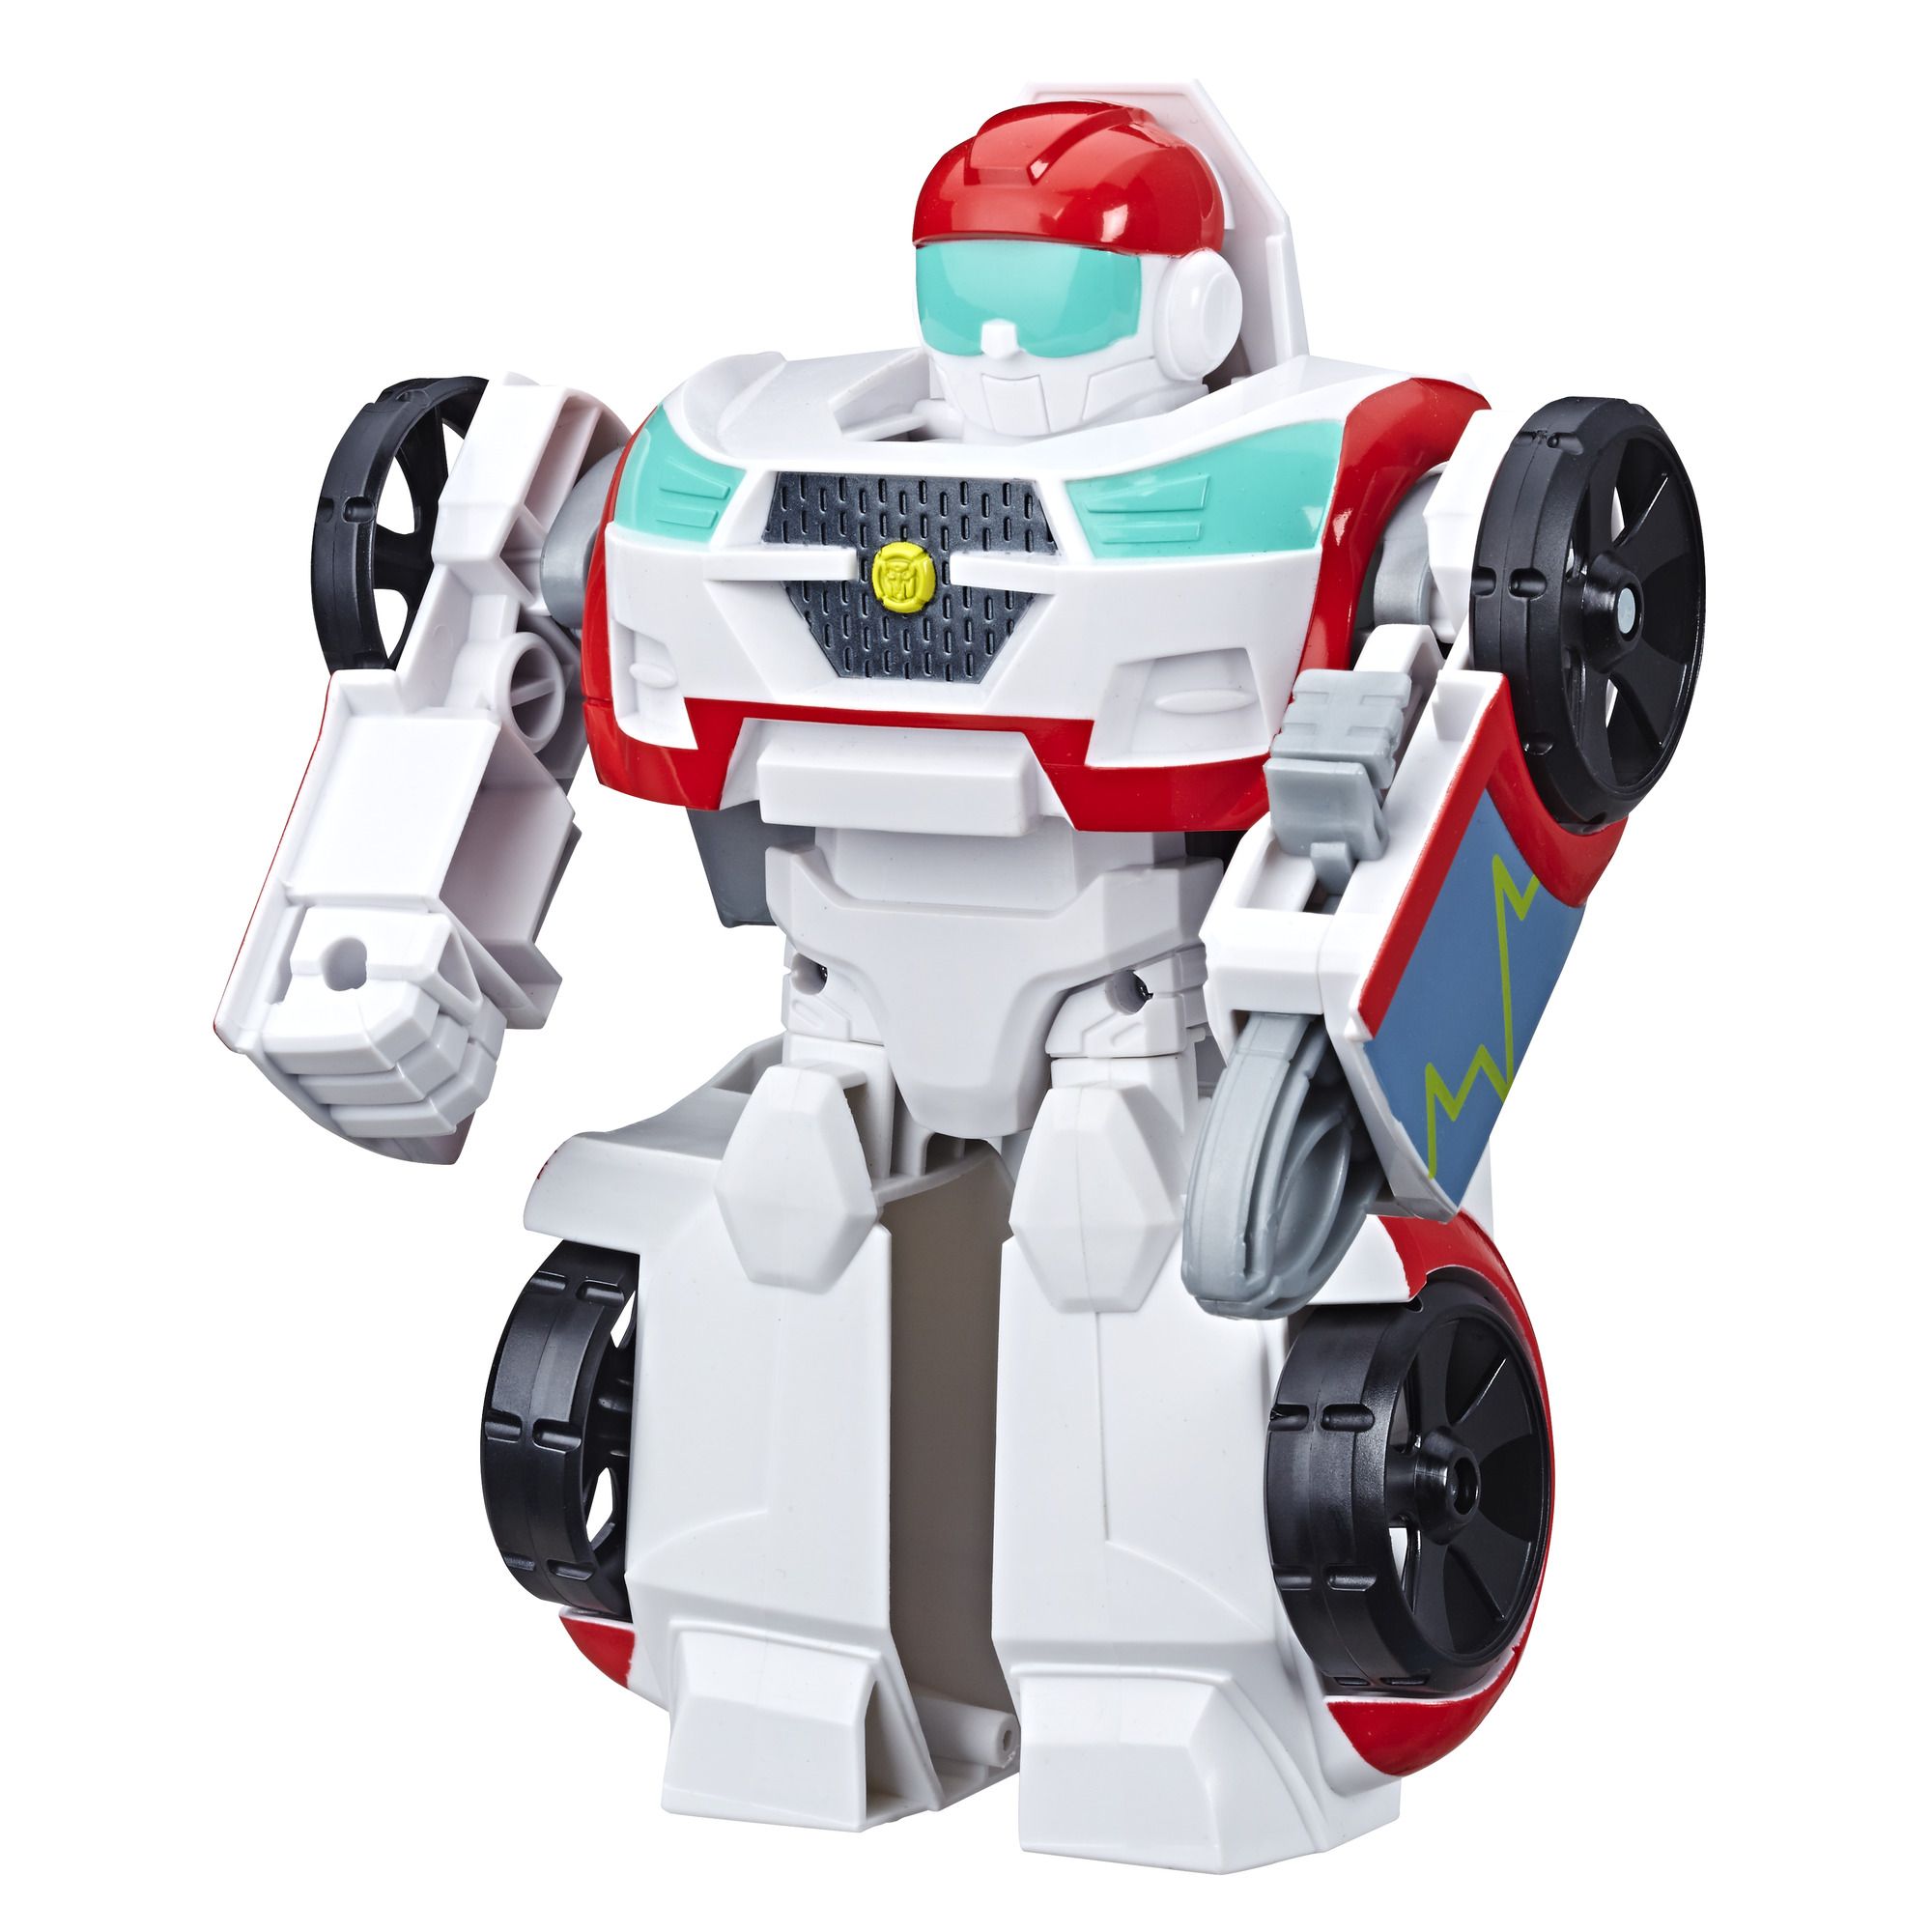 Transformers Rescue Bots Academy Medix The Doc Bot Toy Robot